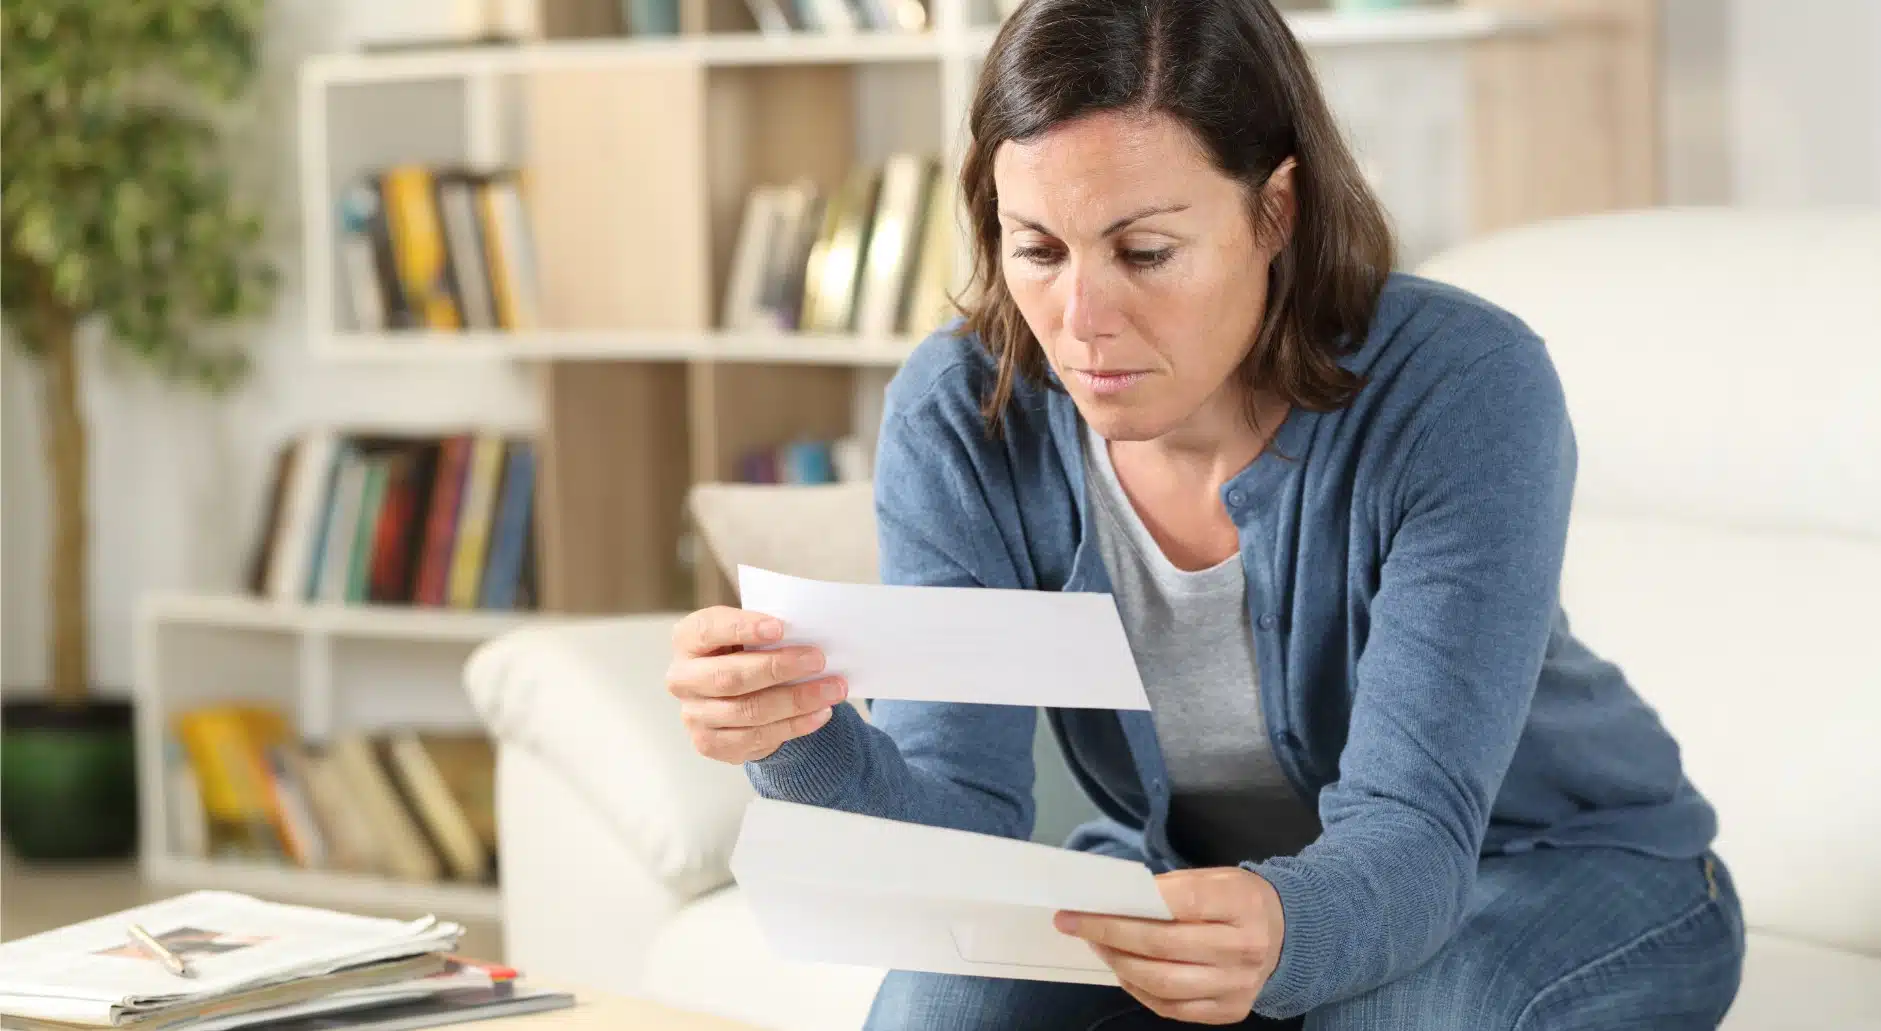 A woman looking at a check received in the mail